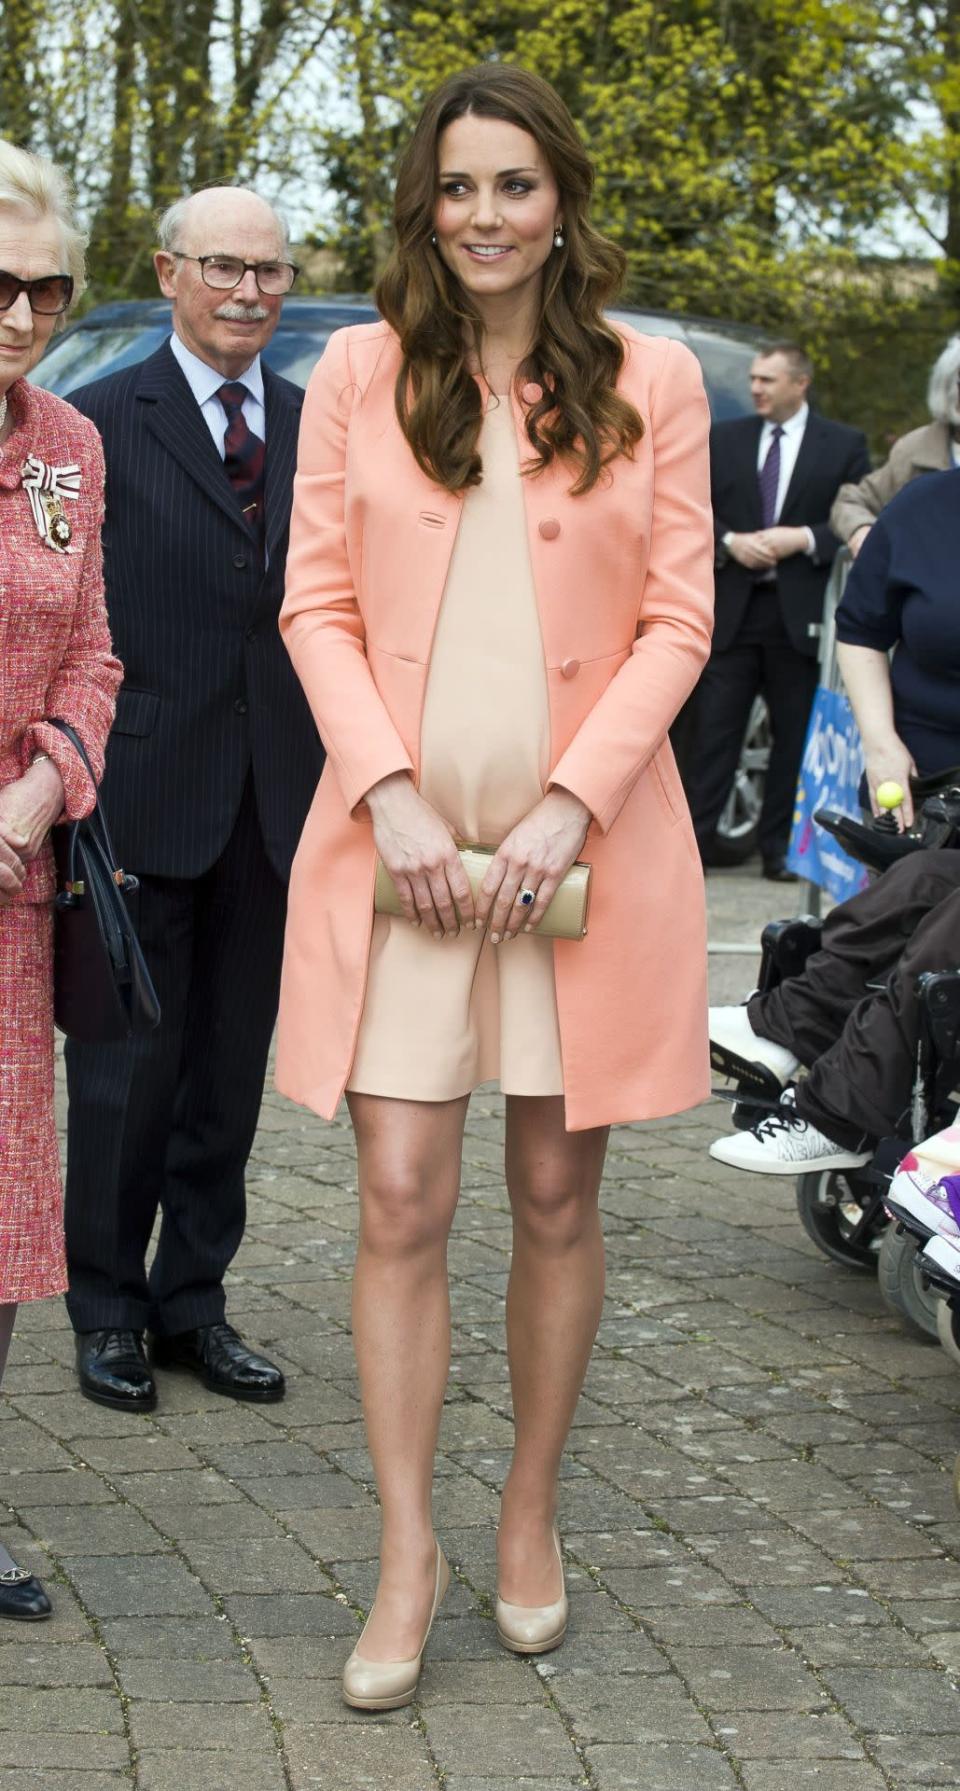 <p>Kate visited a children’s hospice in a summery peach look by Tara Jarmon. She paired the look with a nude clutch and heels - both by L.K. Bennett. </p><p><i>[Photo: PA]</i></p>